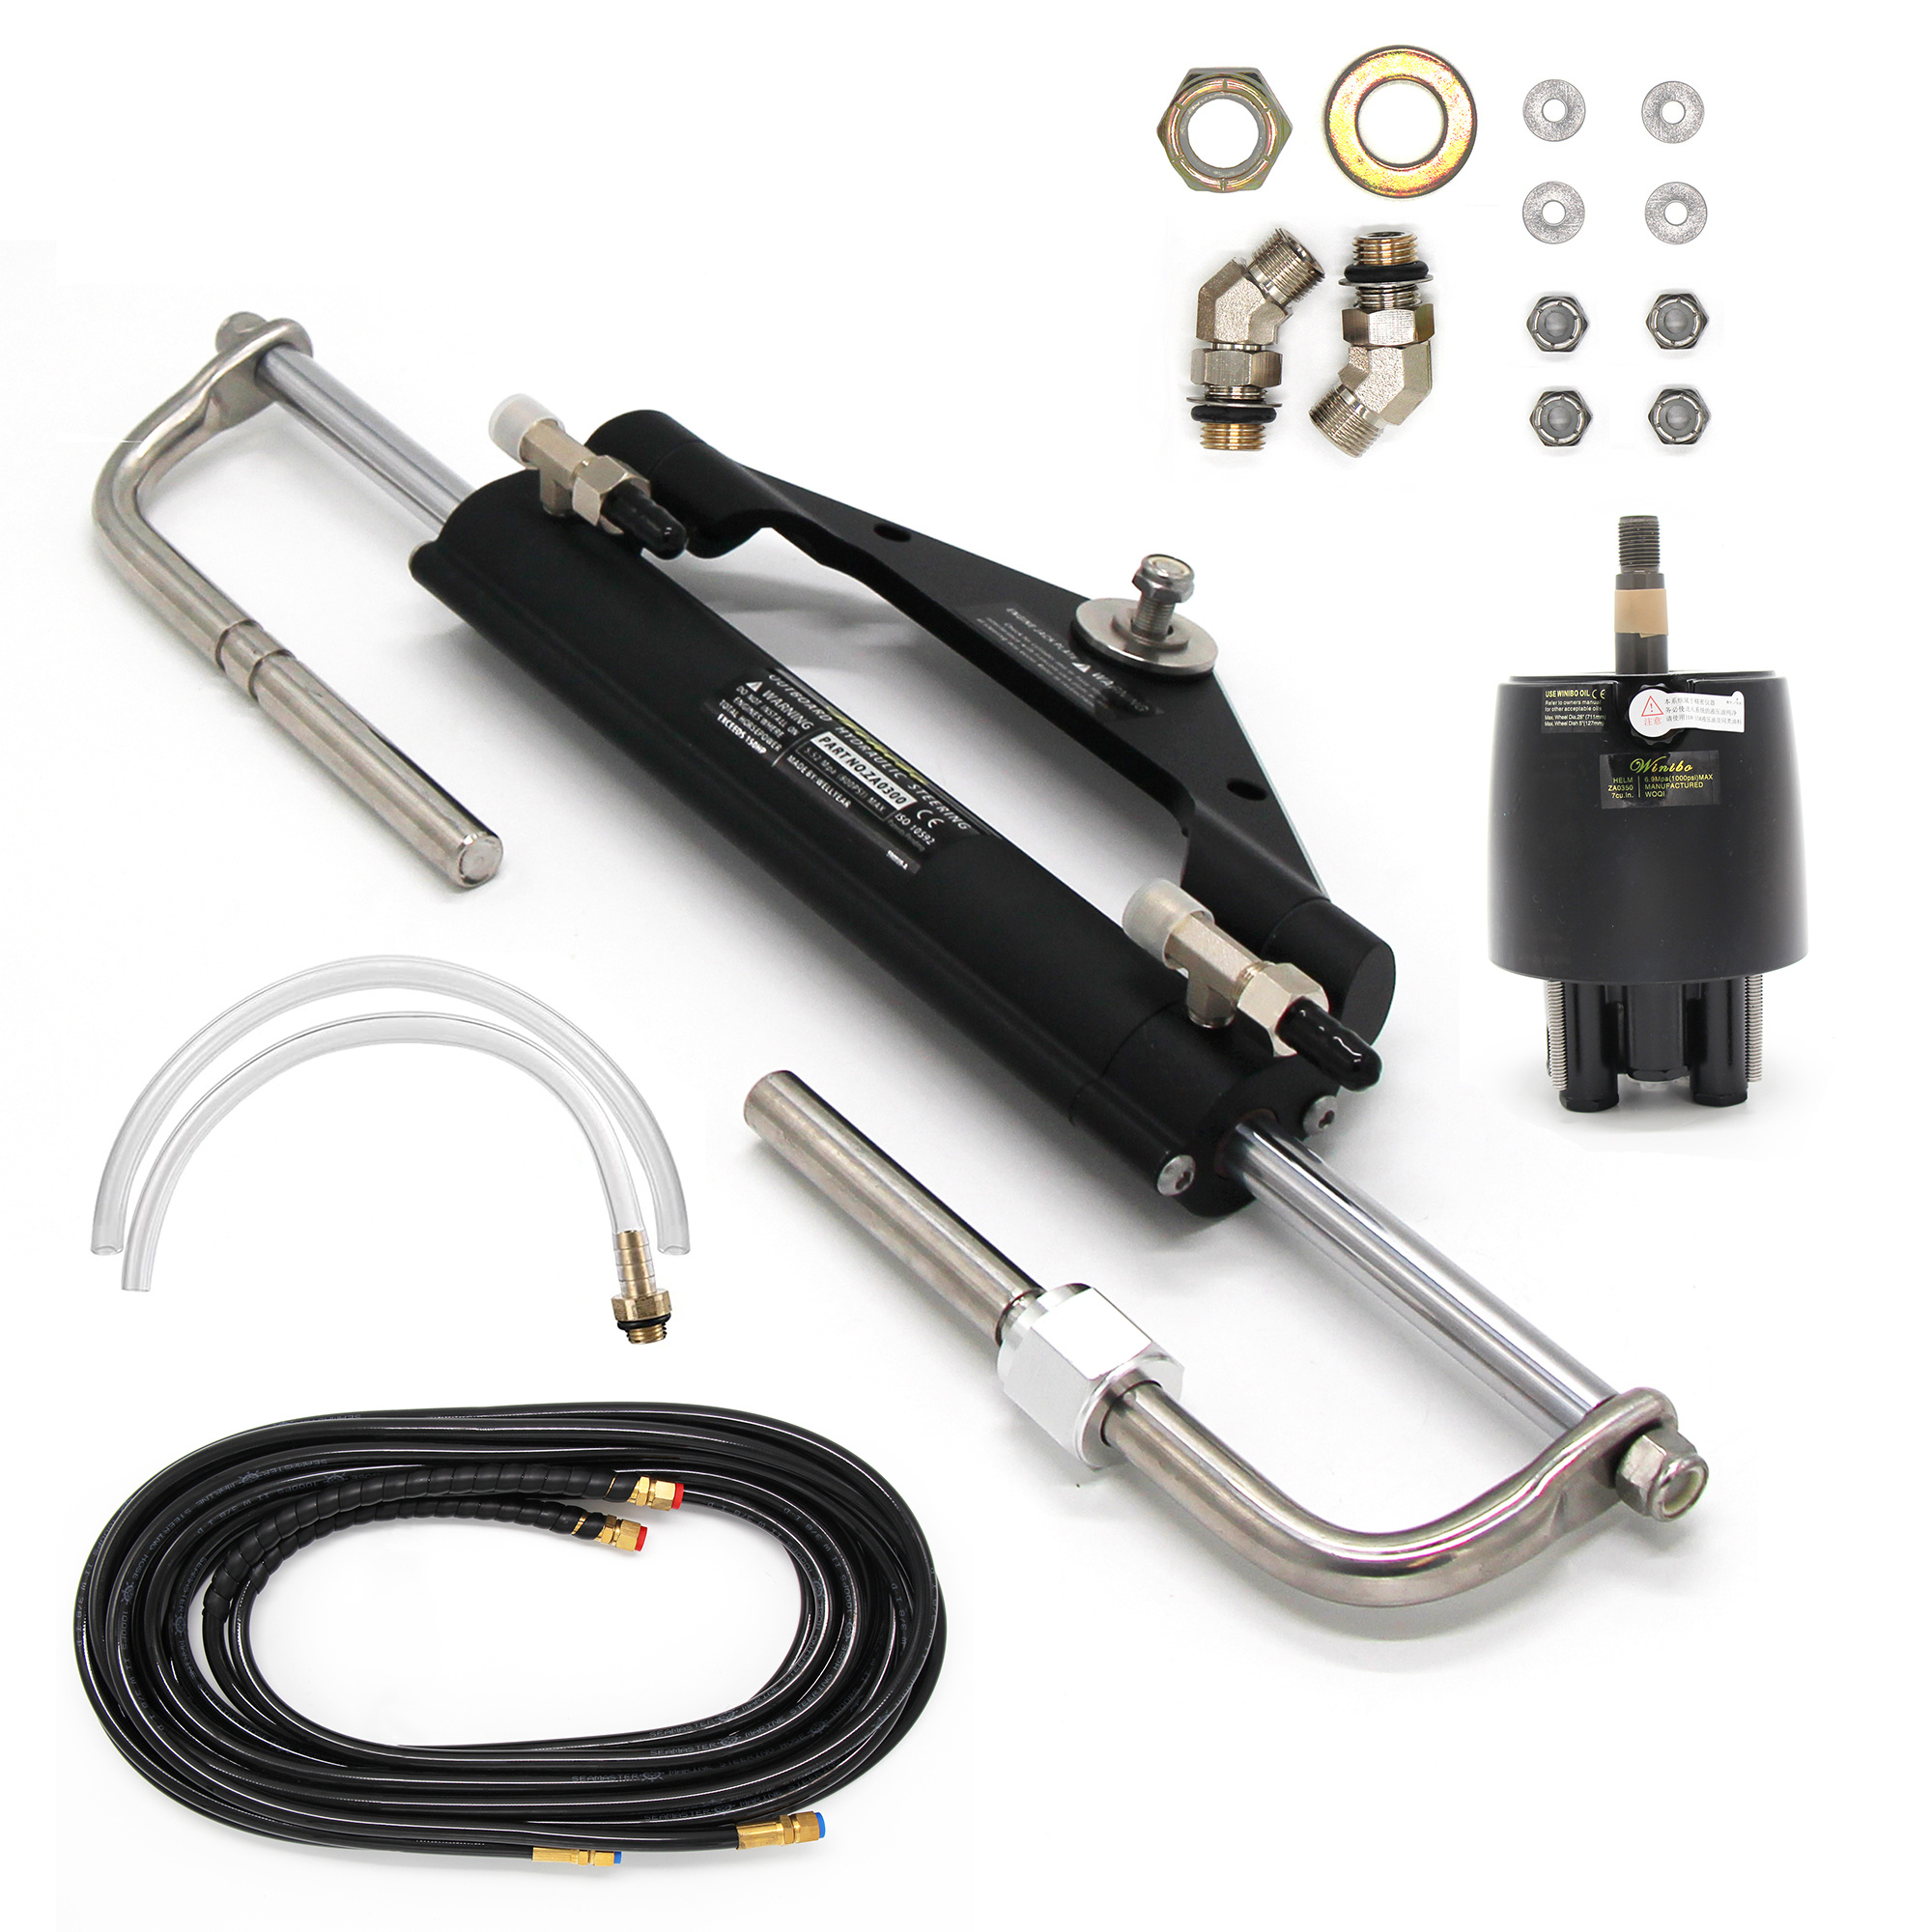 ZA0300 Marine Hydraulic Steering System for Outboard Engine up to 150HP